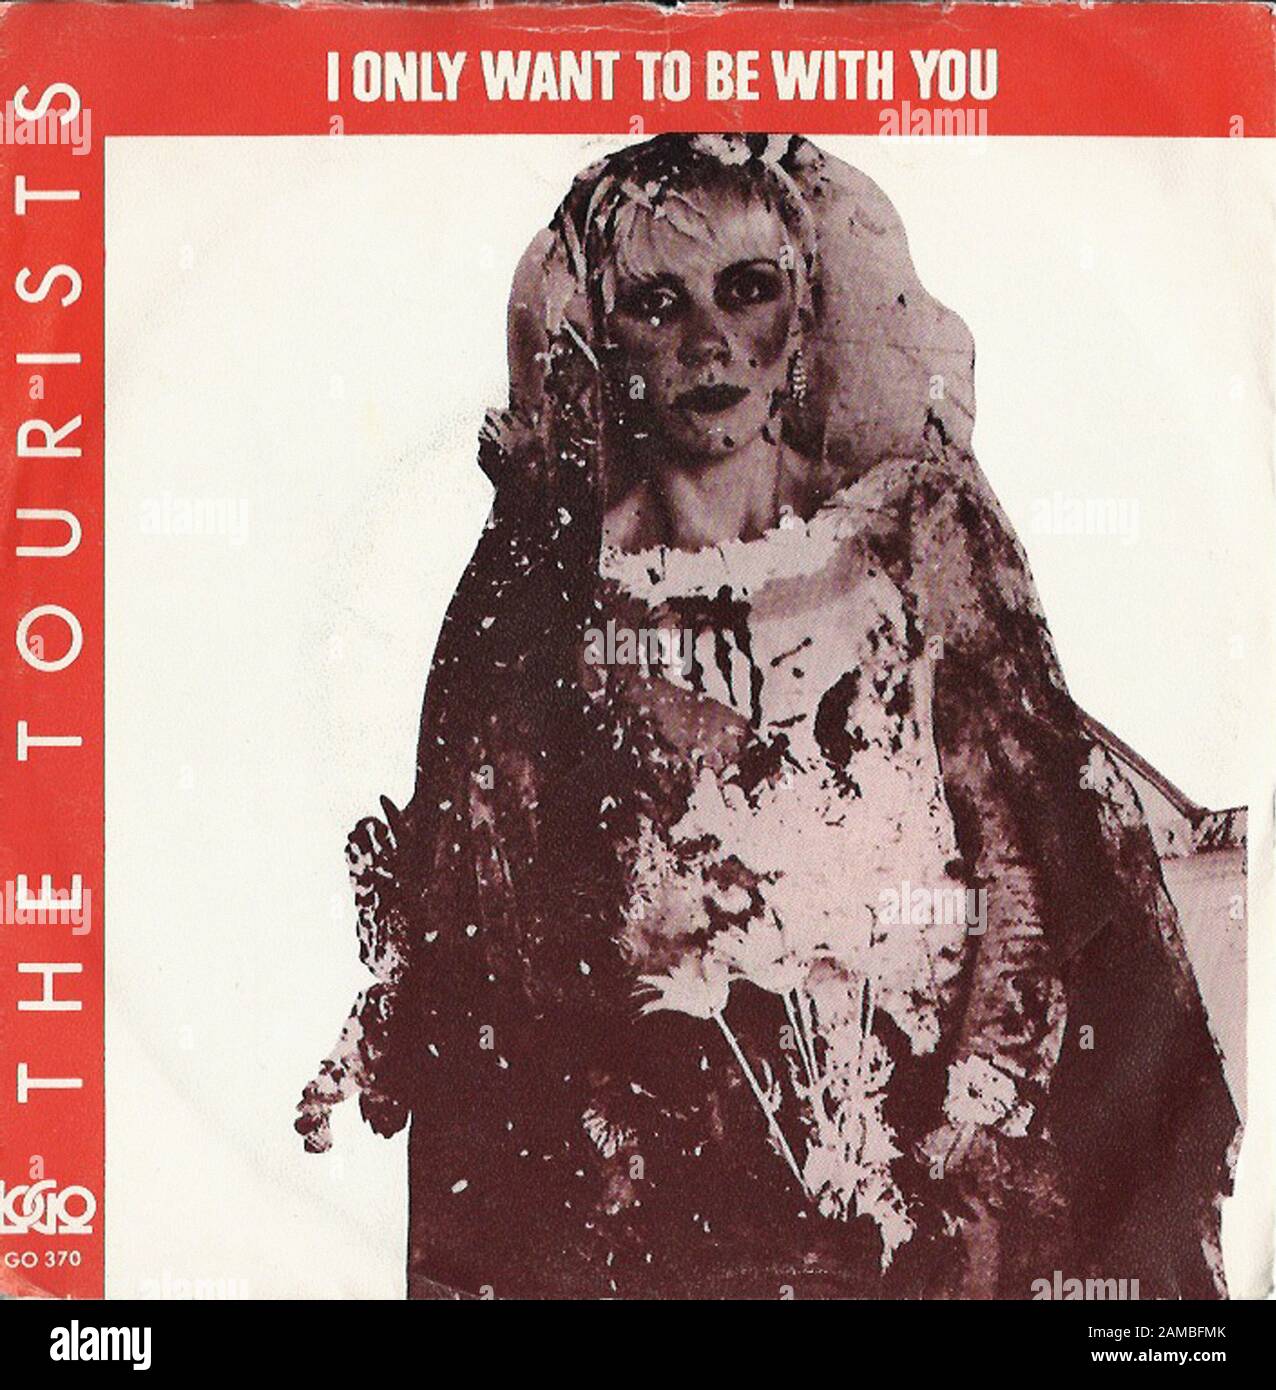 The Tourists - I Only Want To Be With You - Classic vintage rock 7'' vinyl  album Stock Photo - Alamy